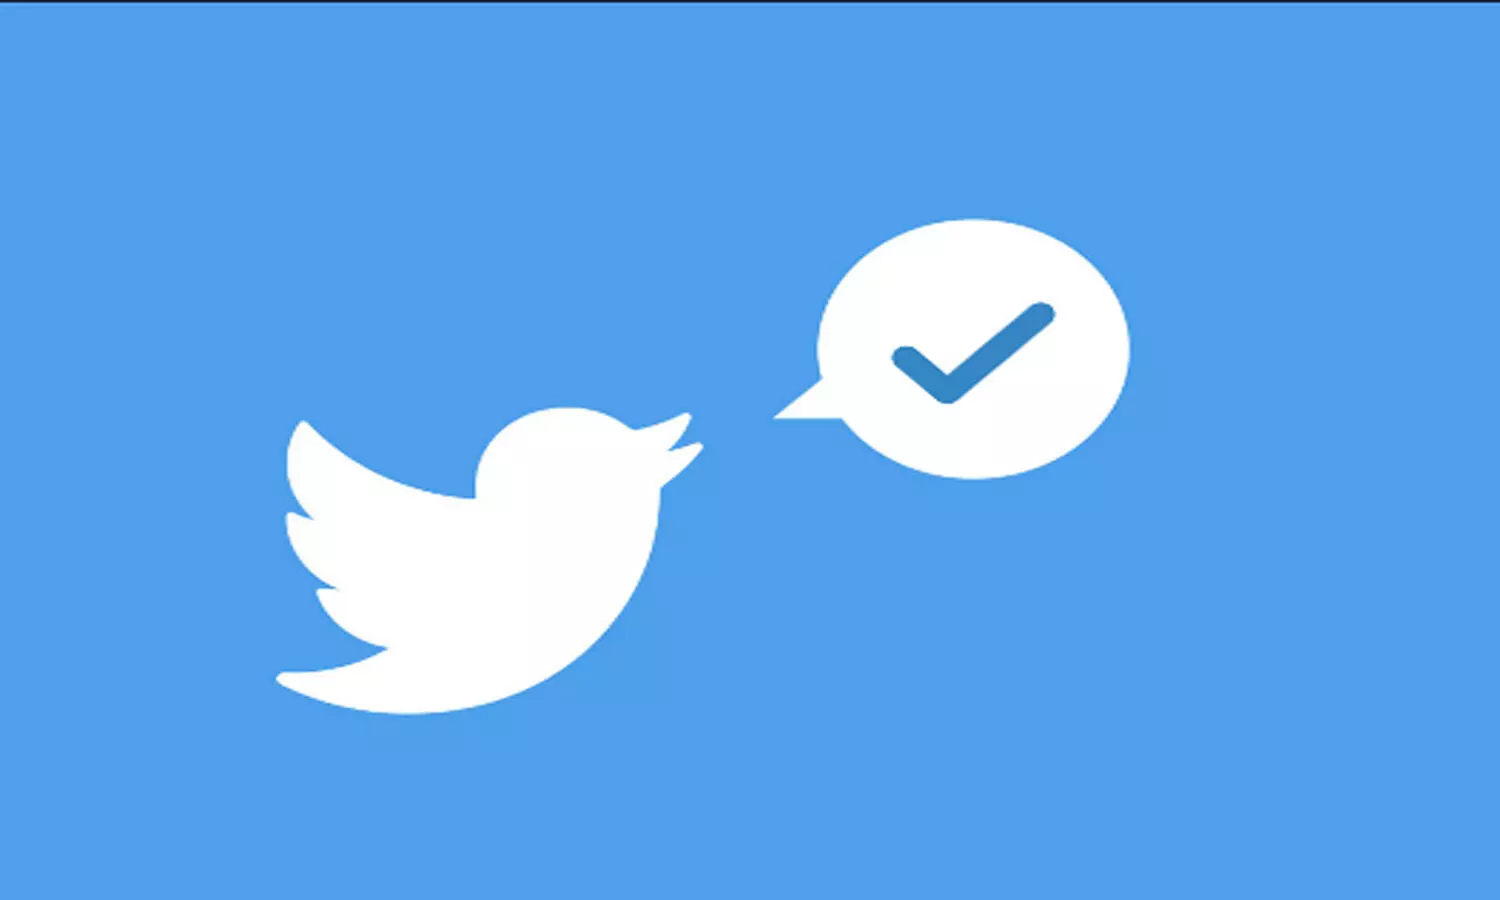 Twitter Verification Application: Know how to apply to get BLUE TICK